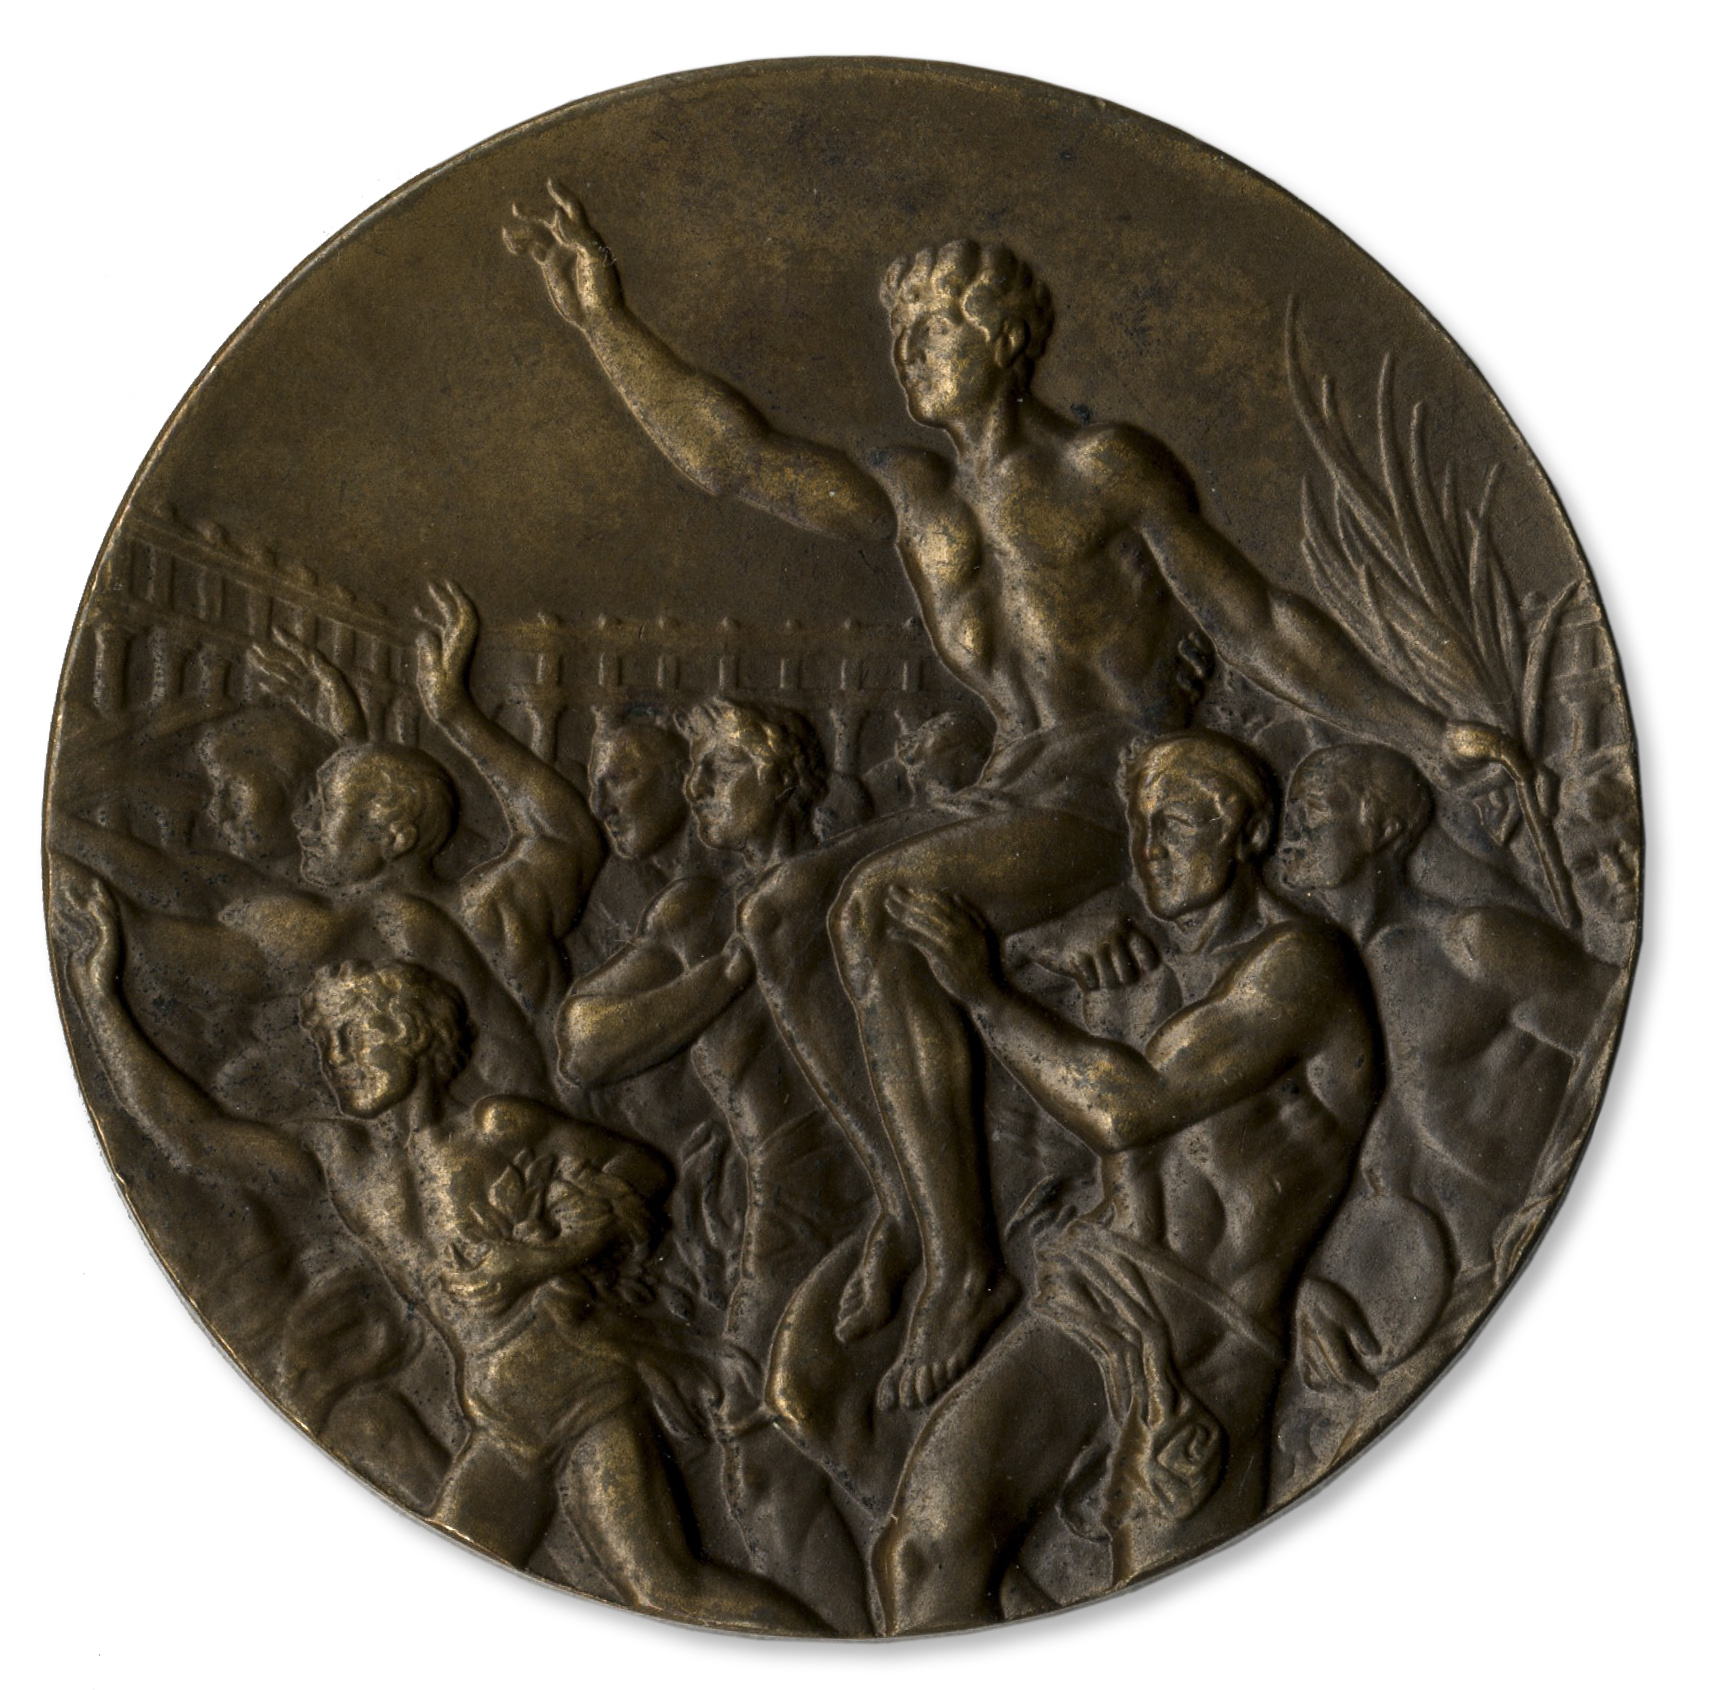 Olympics Memorabilia Bronze Olympic Medal From the 1956 Summer Olympics, Held in Melbourne, - Image 4 of 5